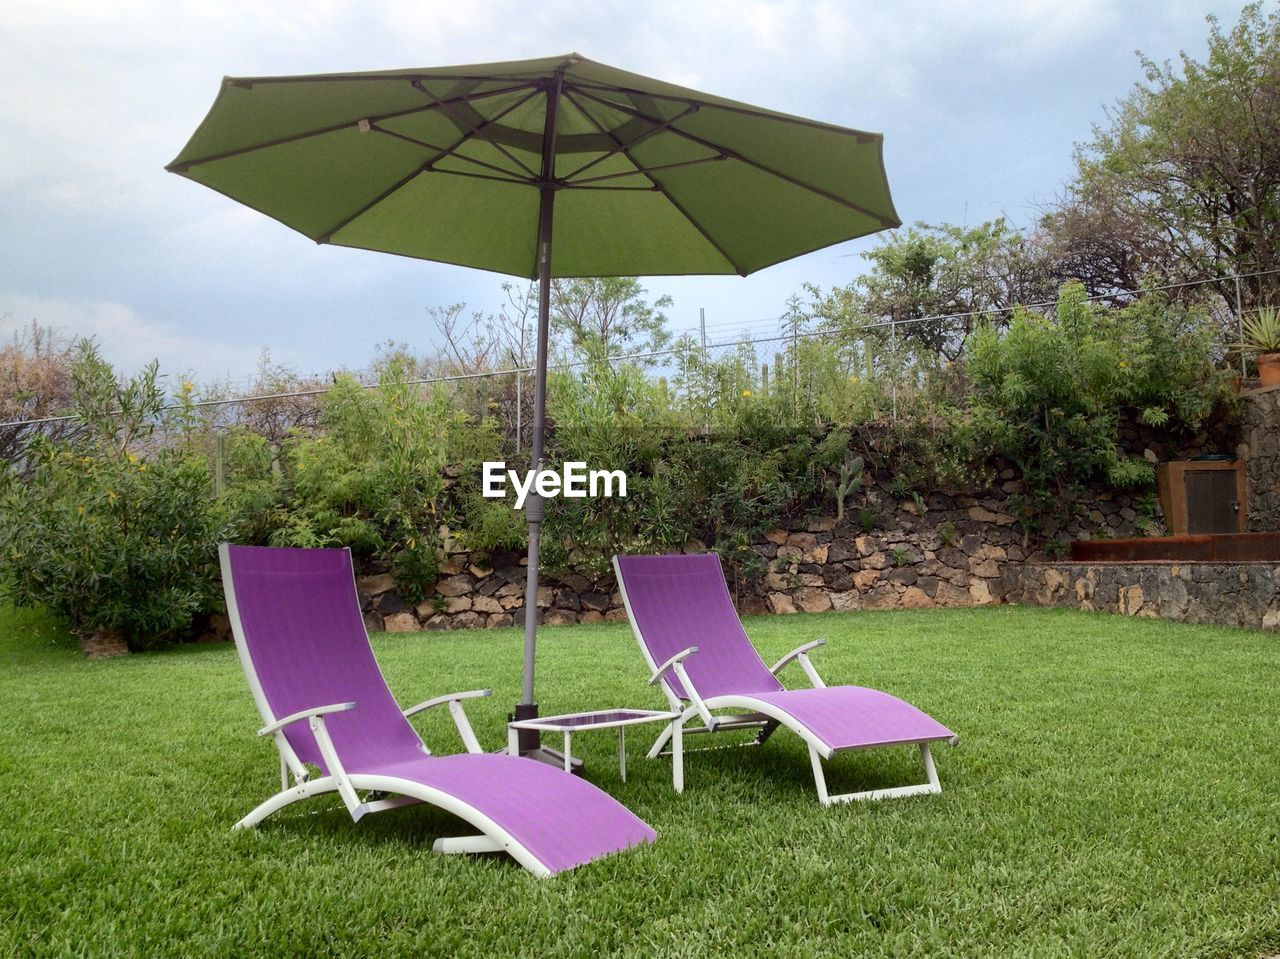 Patio umbrella with lounge chair in field